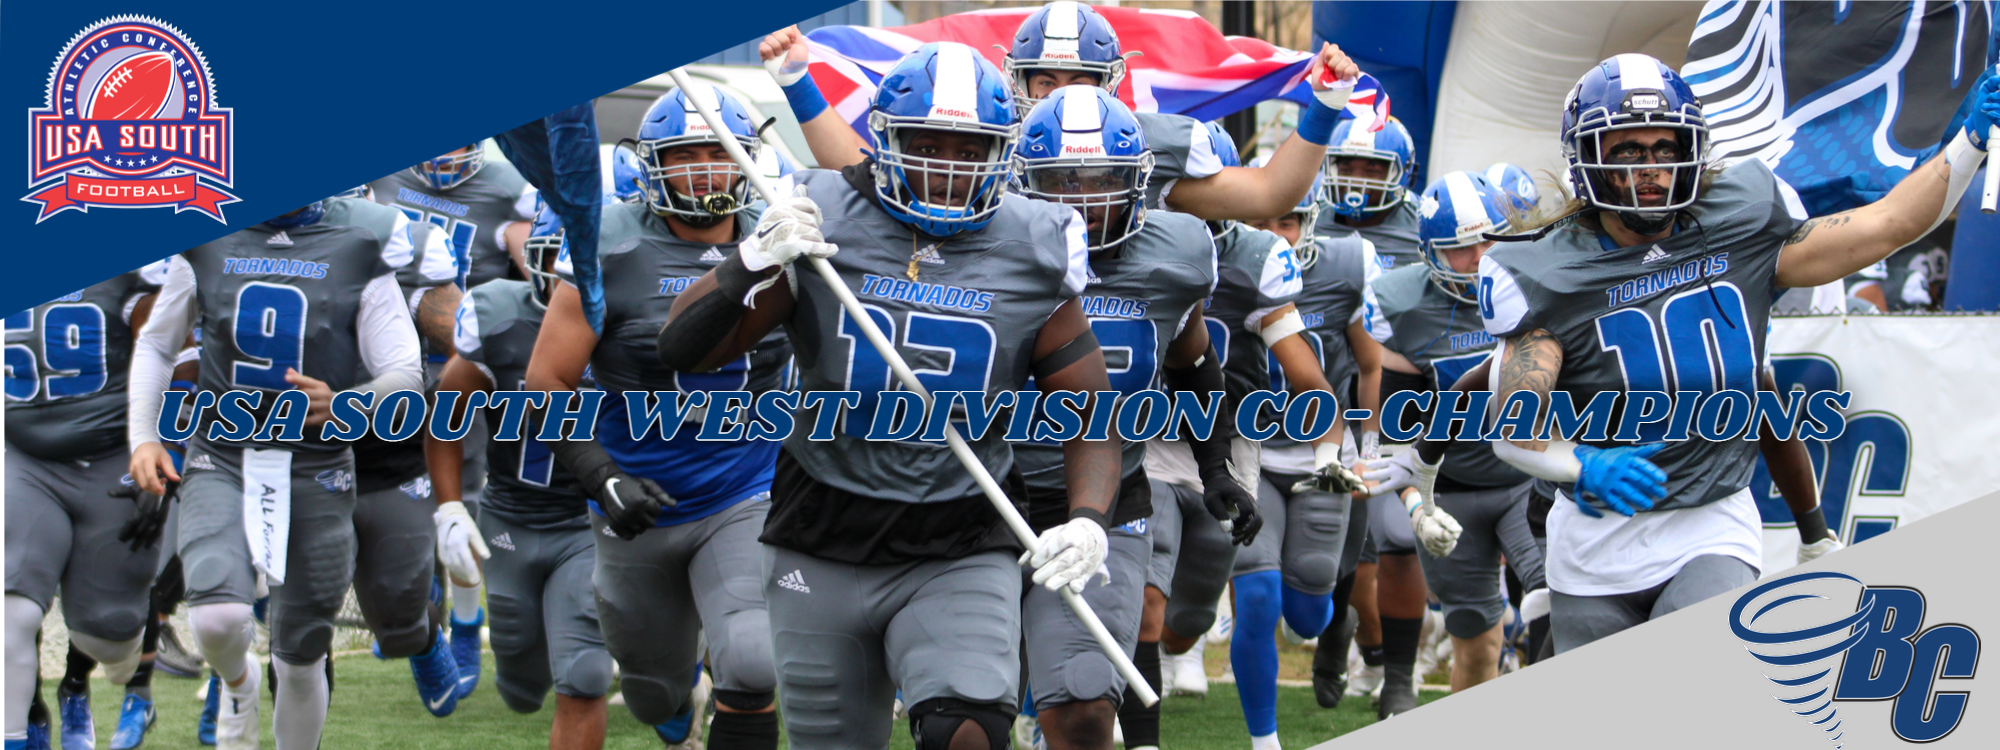 USA South Conference Declares Brevard College as West Division Co-Champions